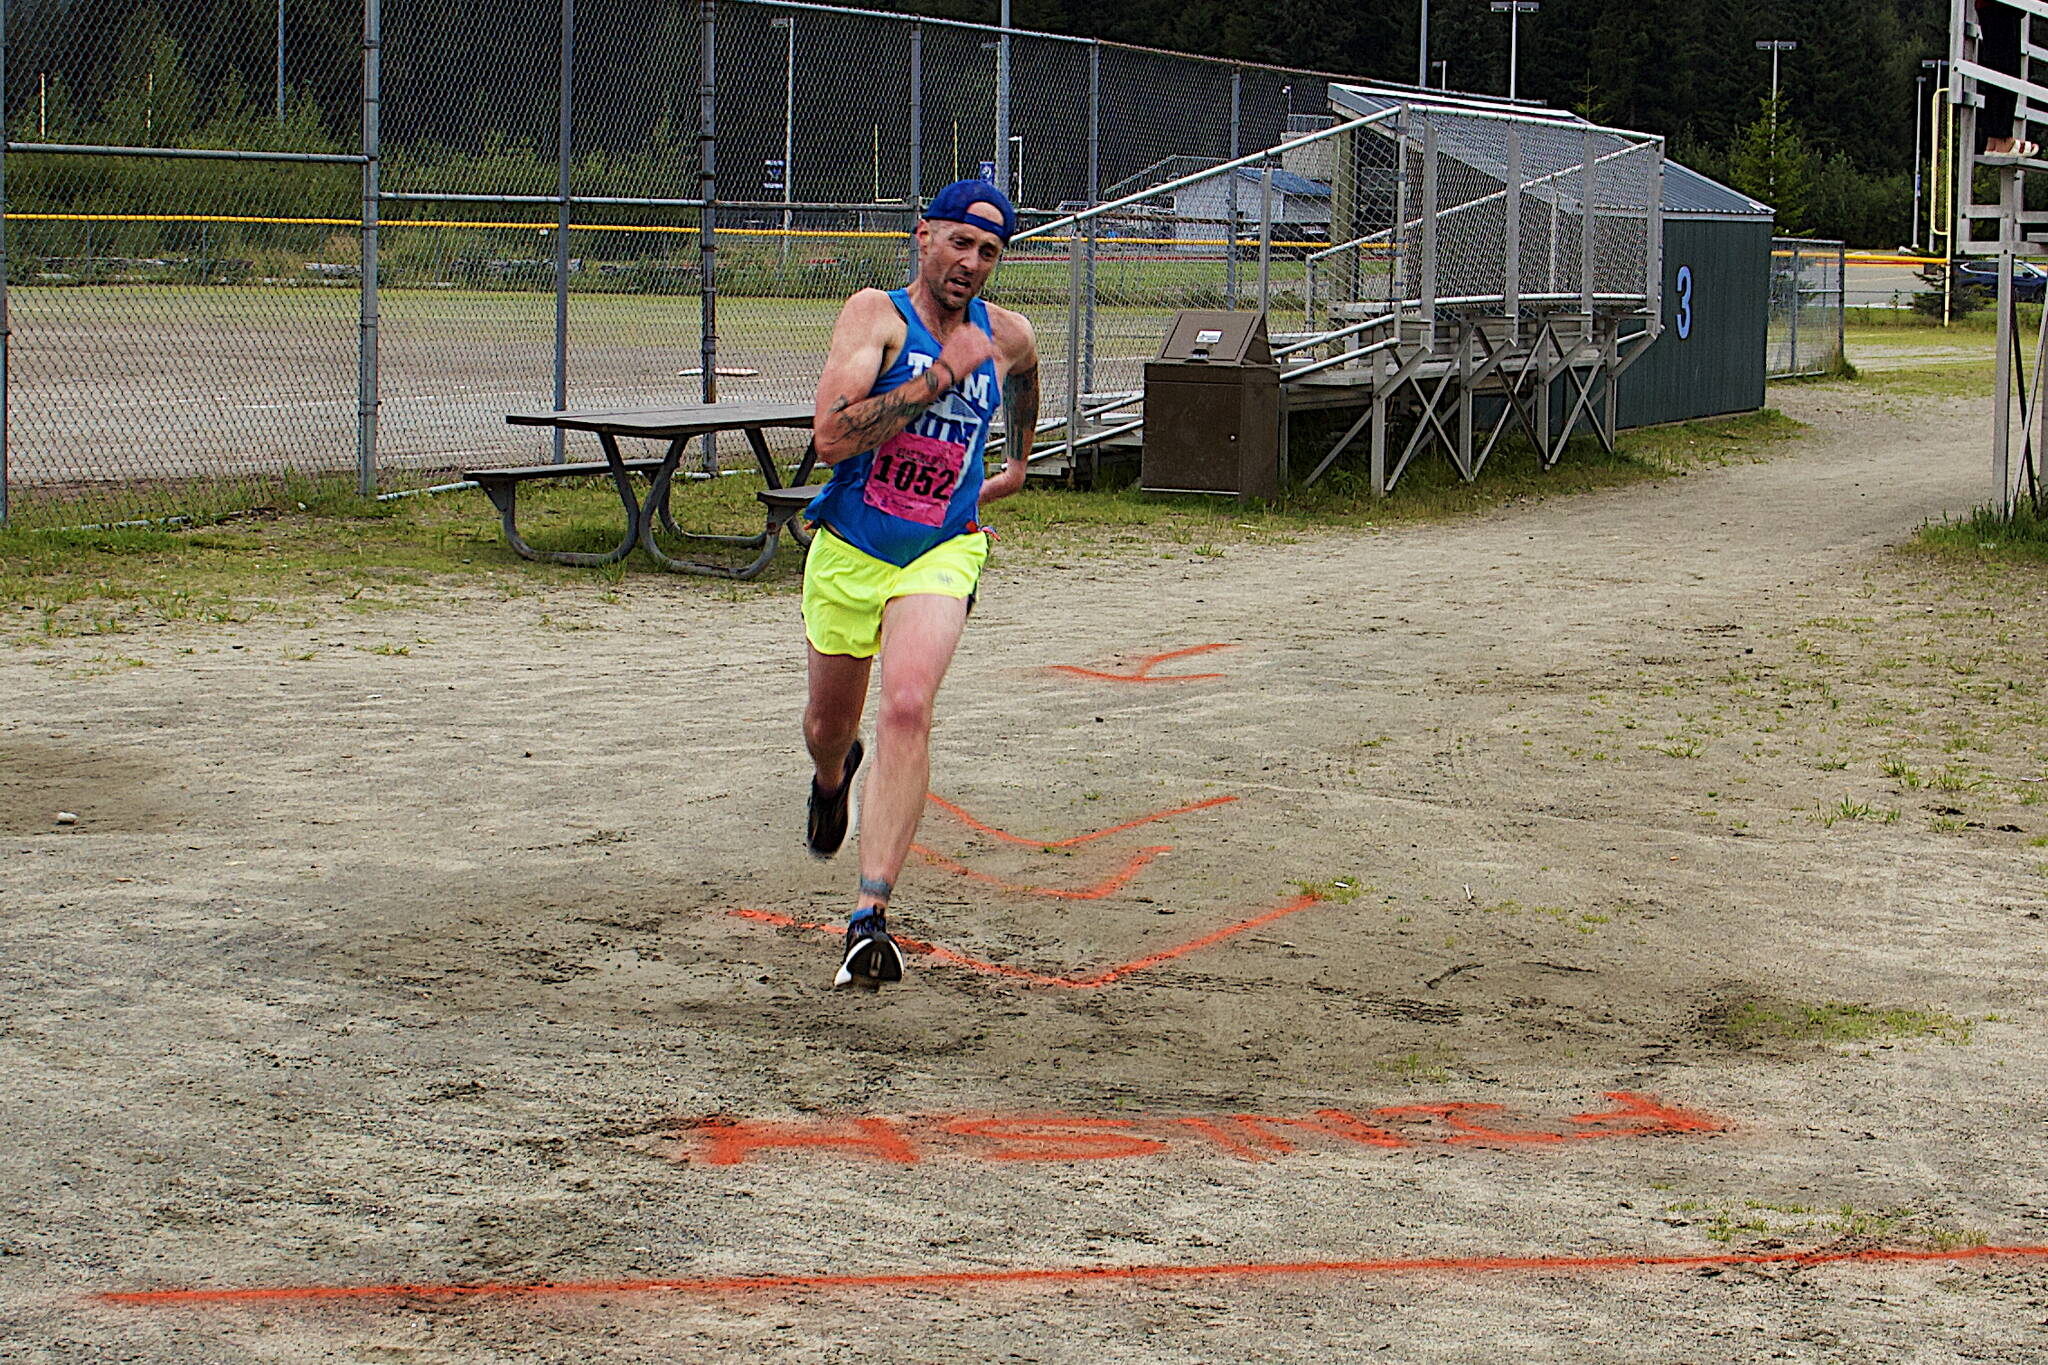 Jesse Stringer of Juneau wins the 5K portion of the 32nd Annual Beat the Odds: A Race Against Cancer on Saturday with a time of 18 minutes, 48 seconds. (Mark Sabbatini / Juneau Empire)